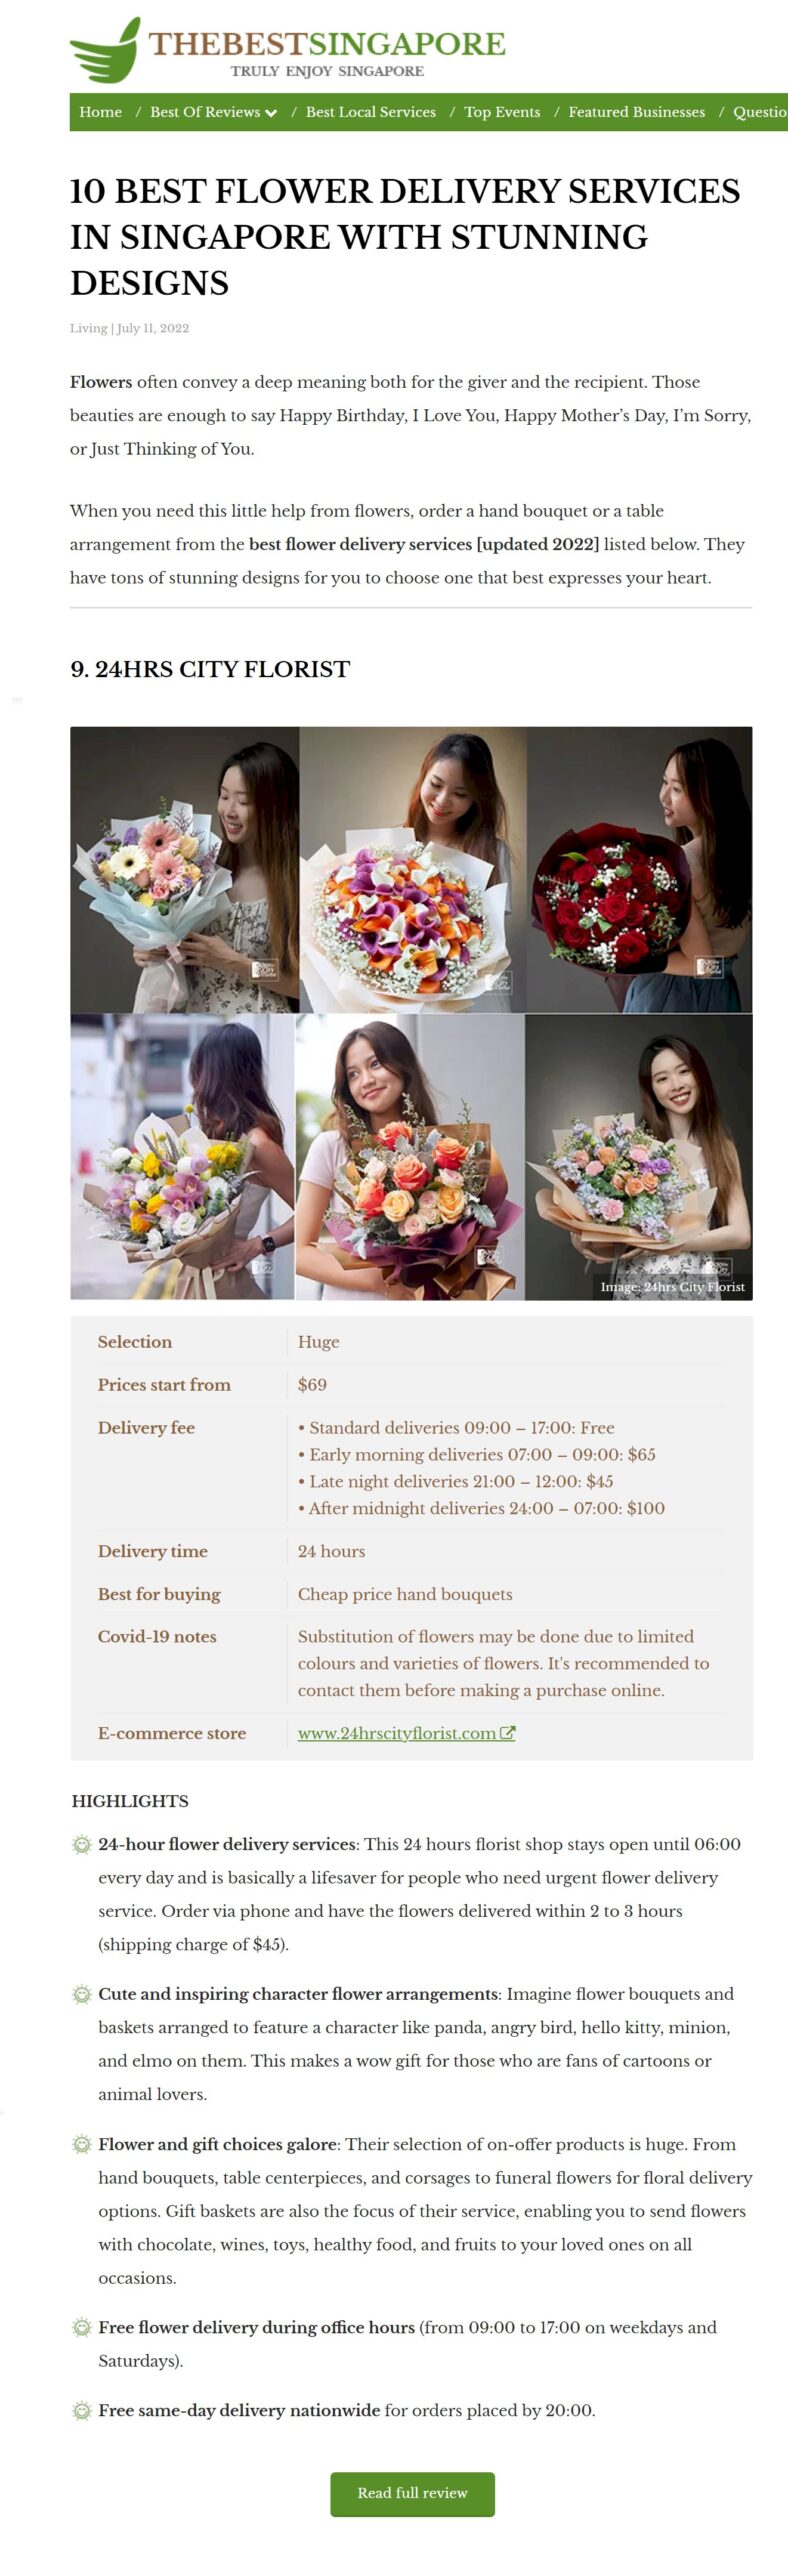 24hrscityflorist voted top 10 flower delivery service in Singapore